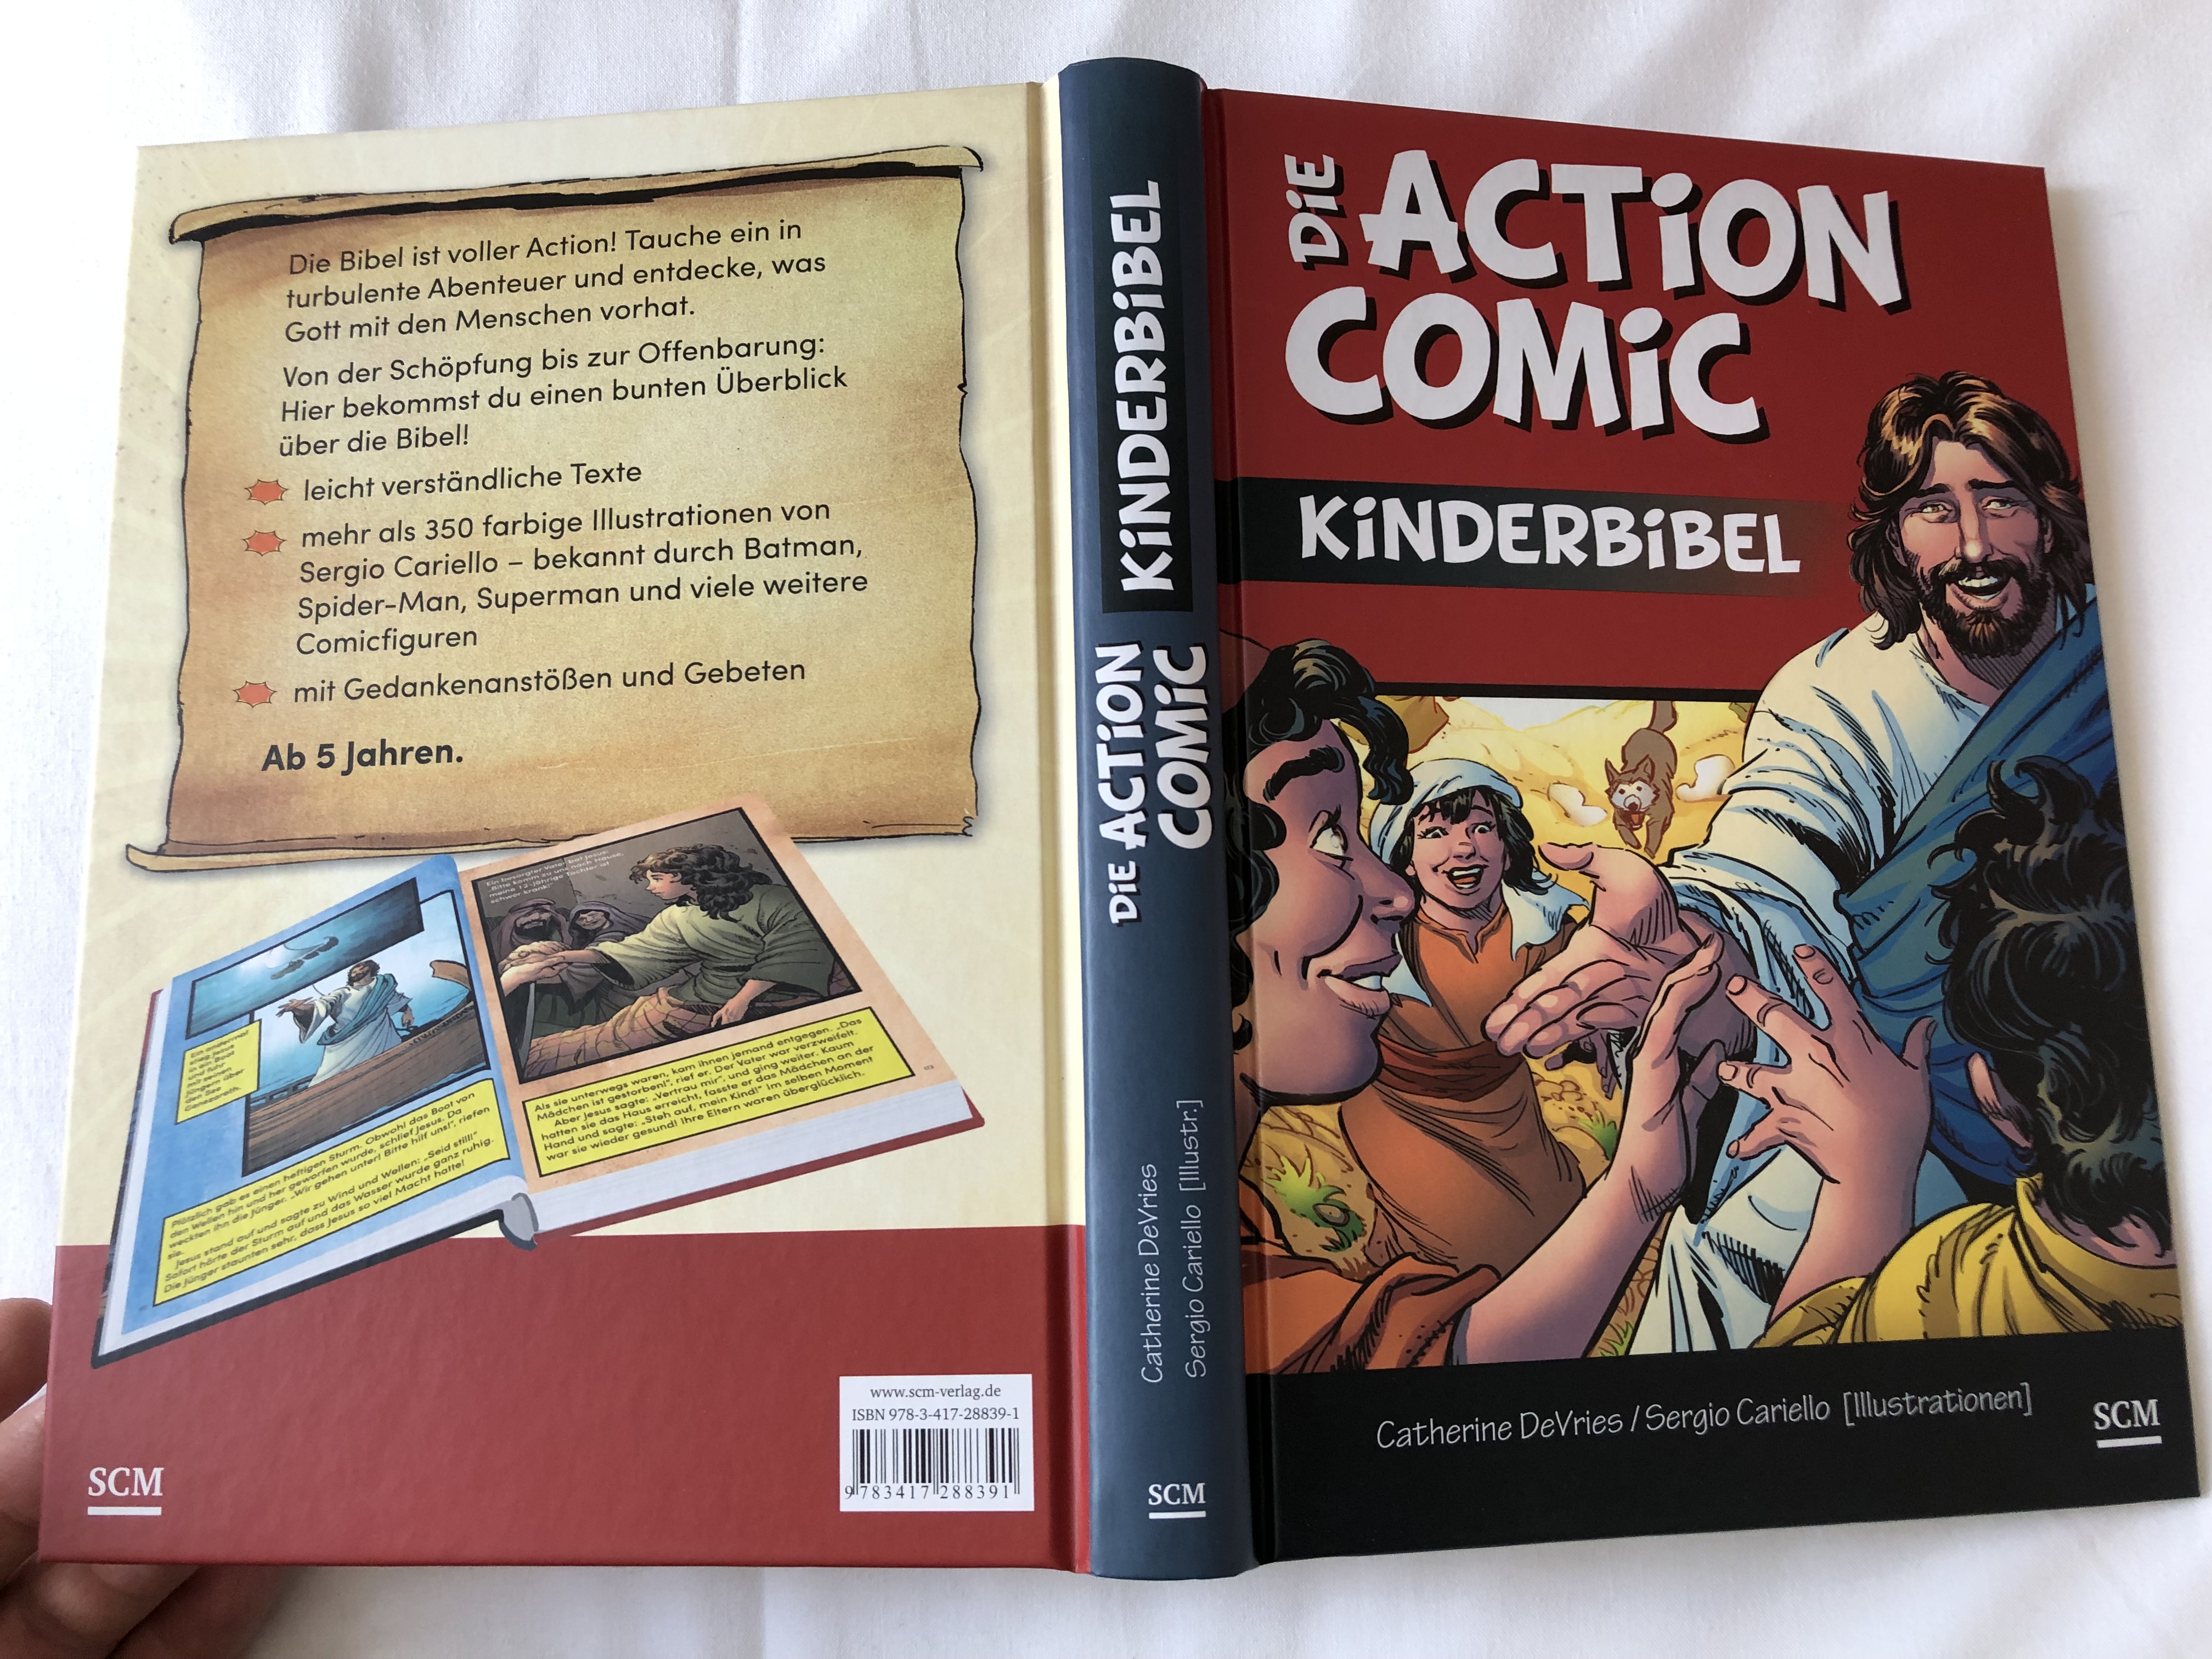 die-action-comic-kinderbibel-by-catherine-devries-sergio-cariello-illustrations-german-translation-of-the-action-storybook-bible-more-than-350-color-illustrations-ages-5-and-up-hardcover-20-.jpg